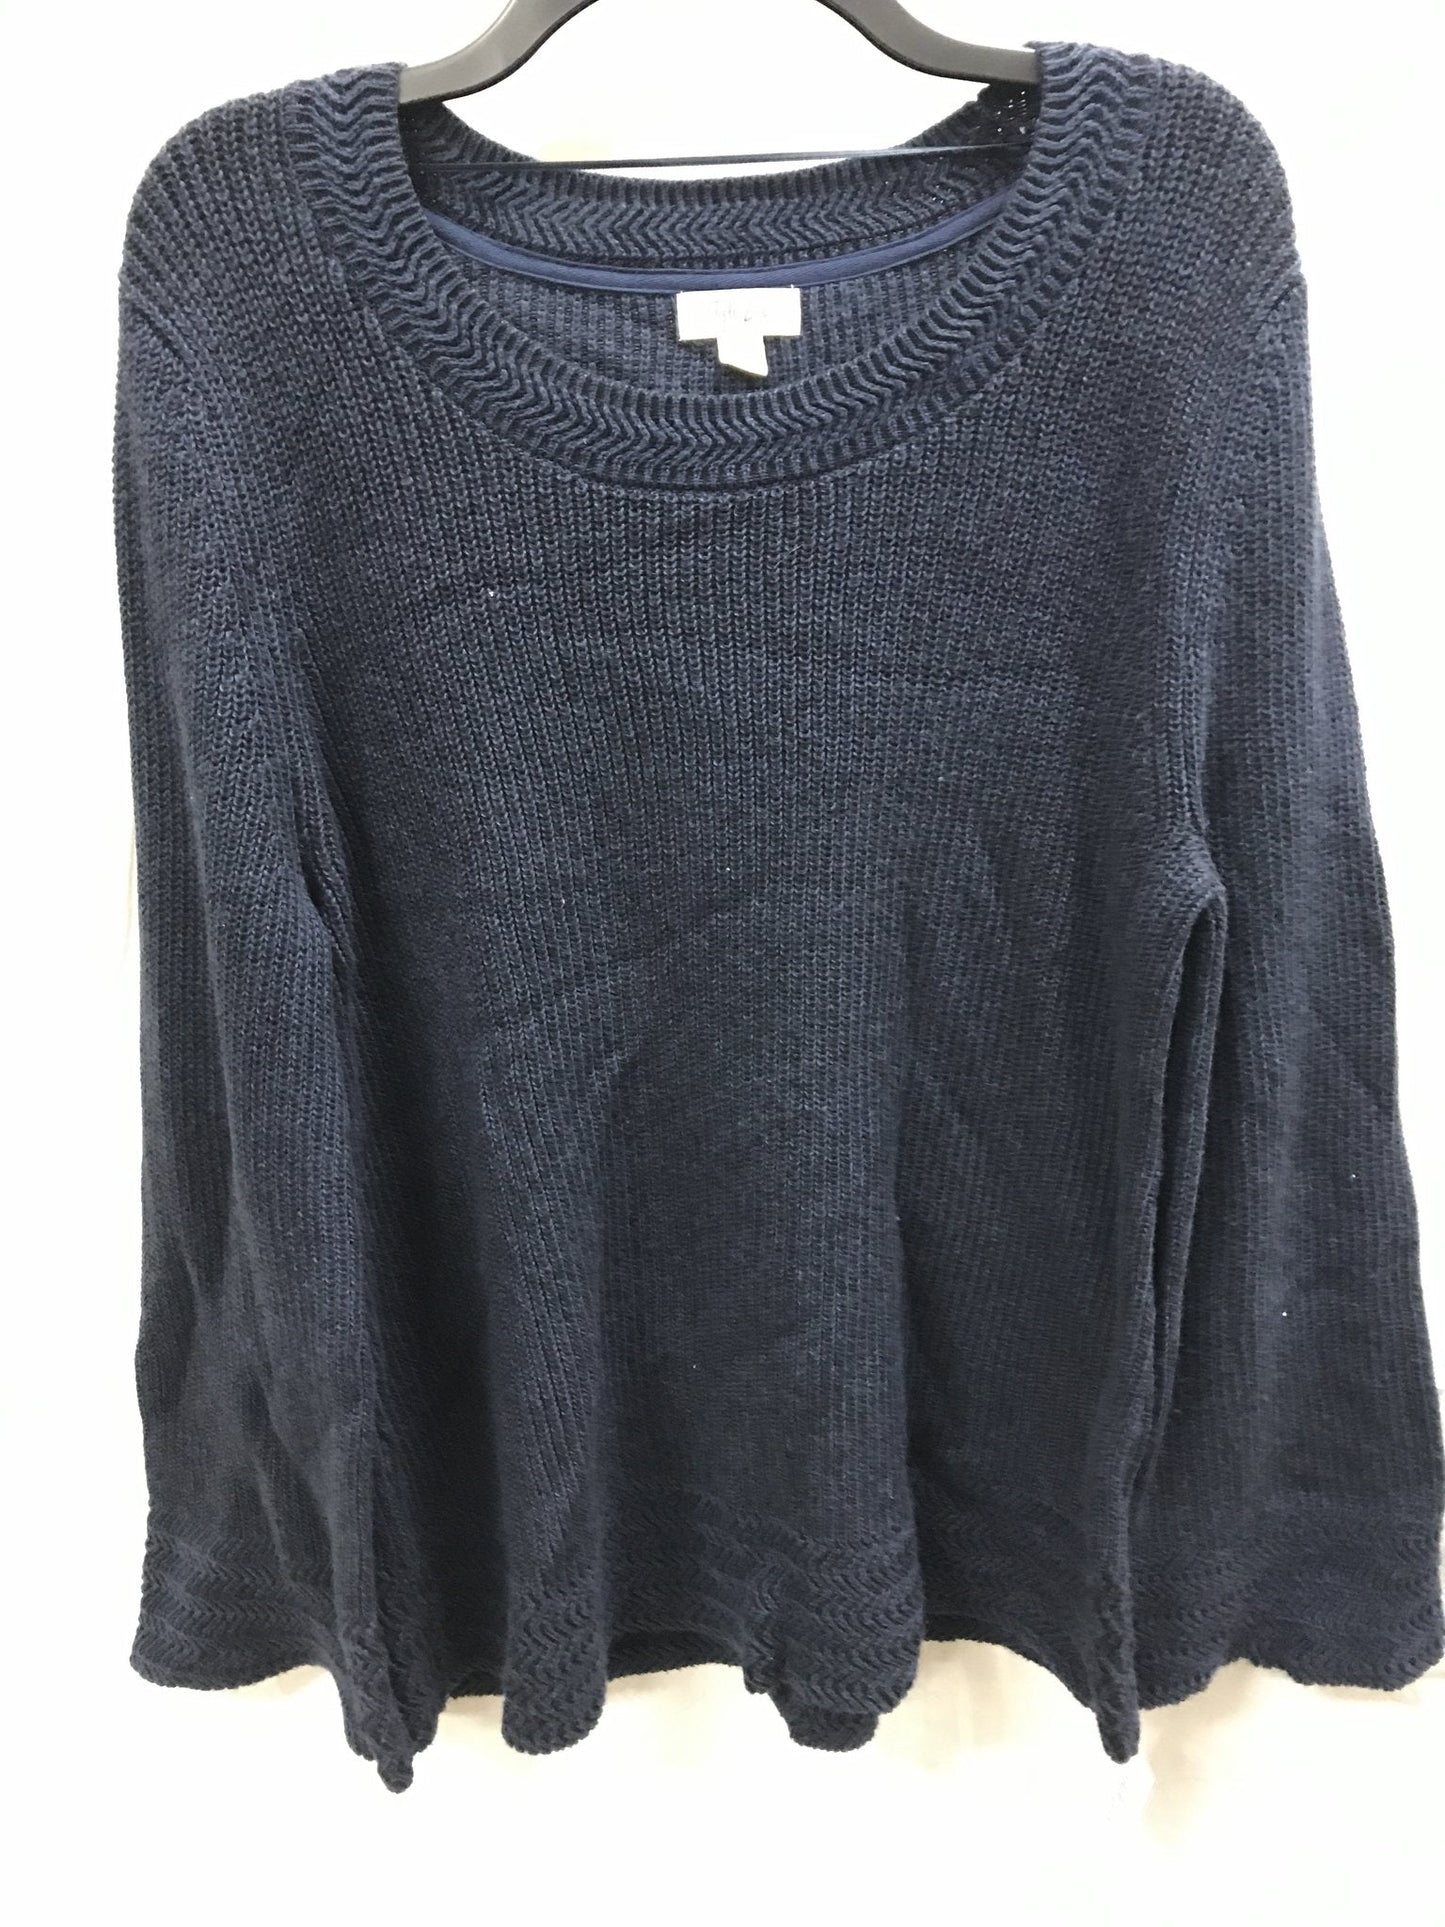 Style & Co Sweater Boxy Body Stitch Pullover Blue Large